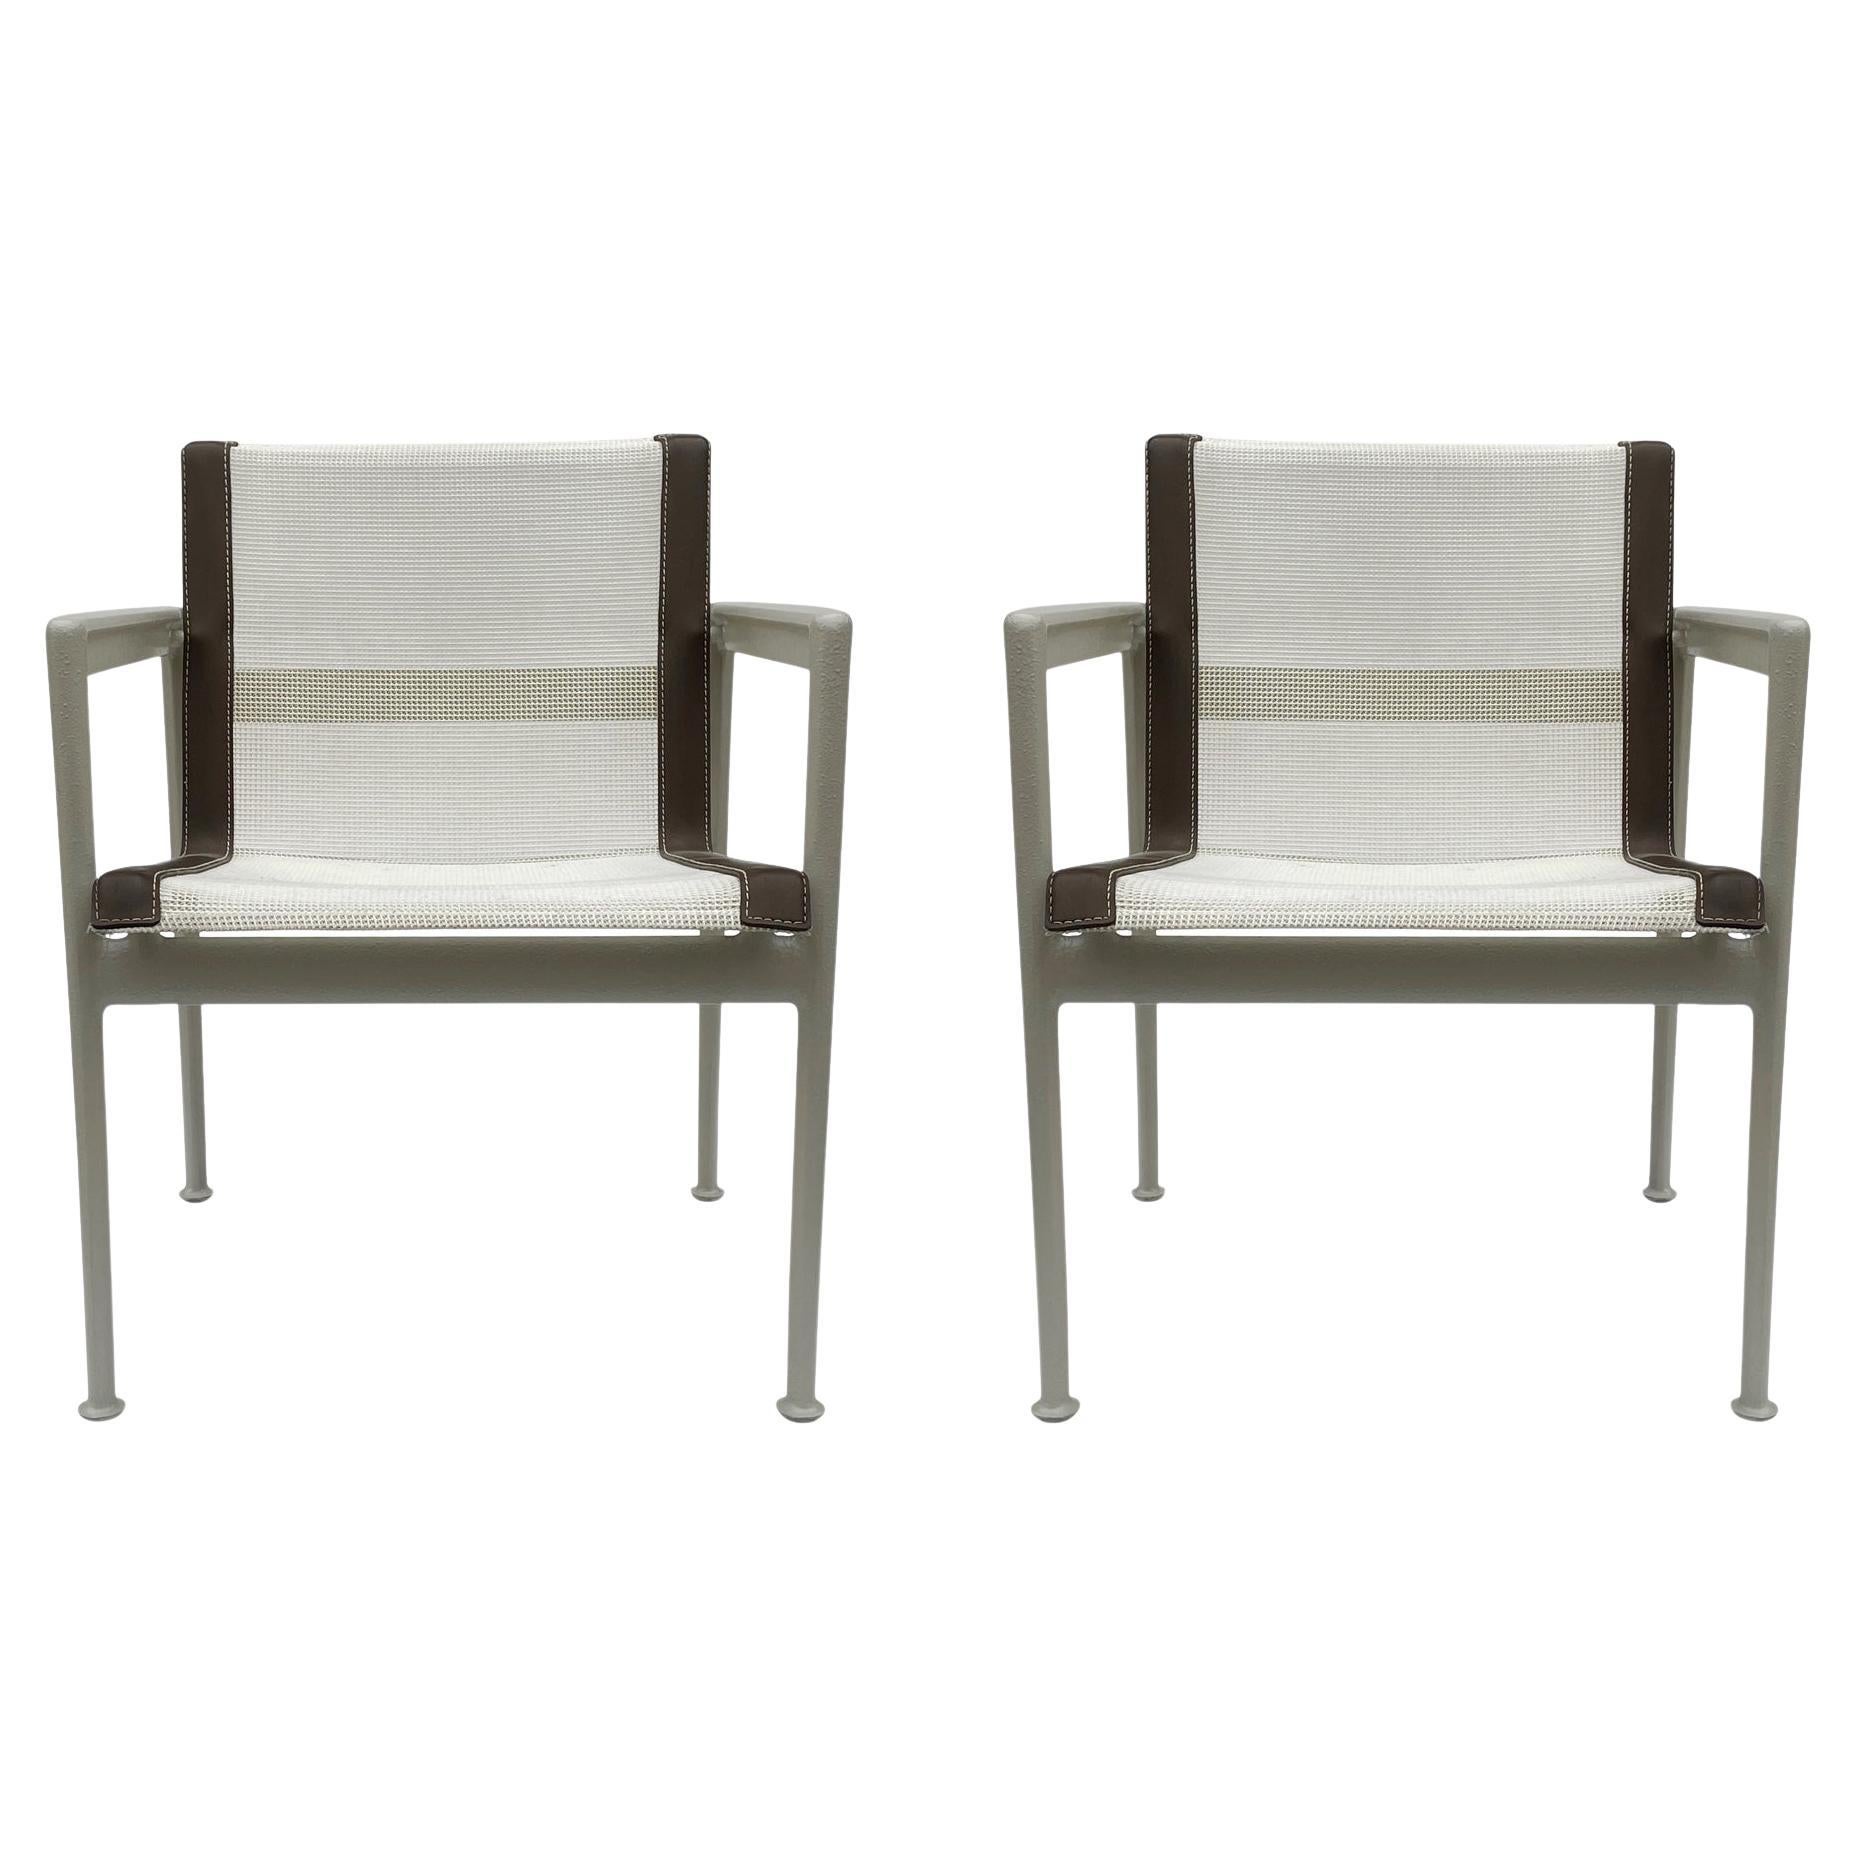 Matching Pair of Mid-Century Modern Outdoor Patio Armchairs by Richard Schultz